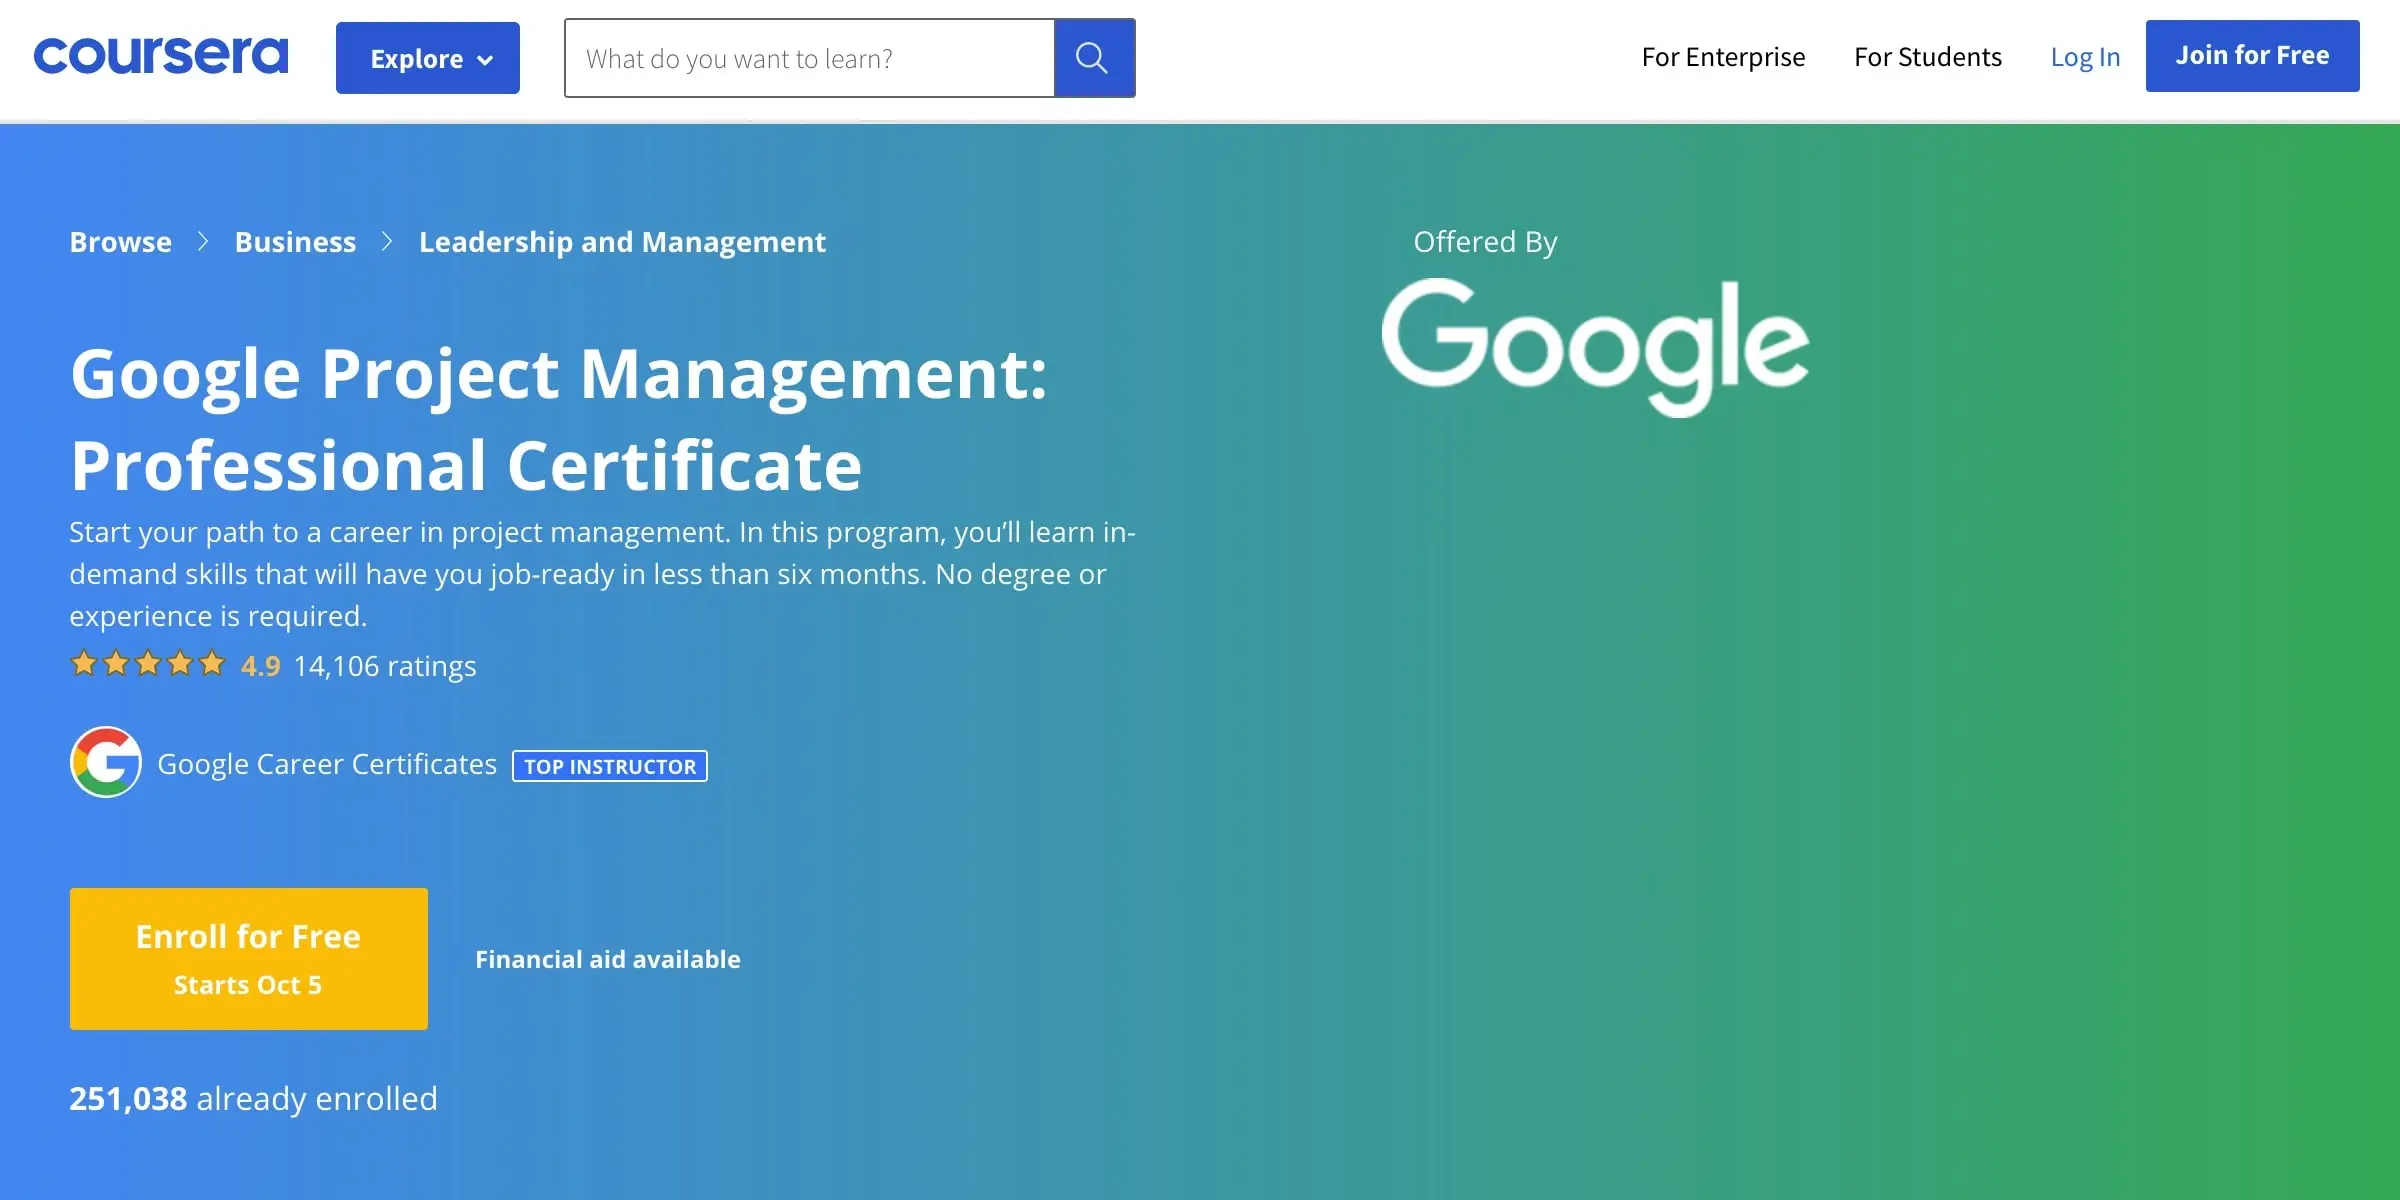 Google Project Management Professional Certificate